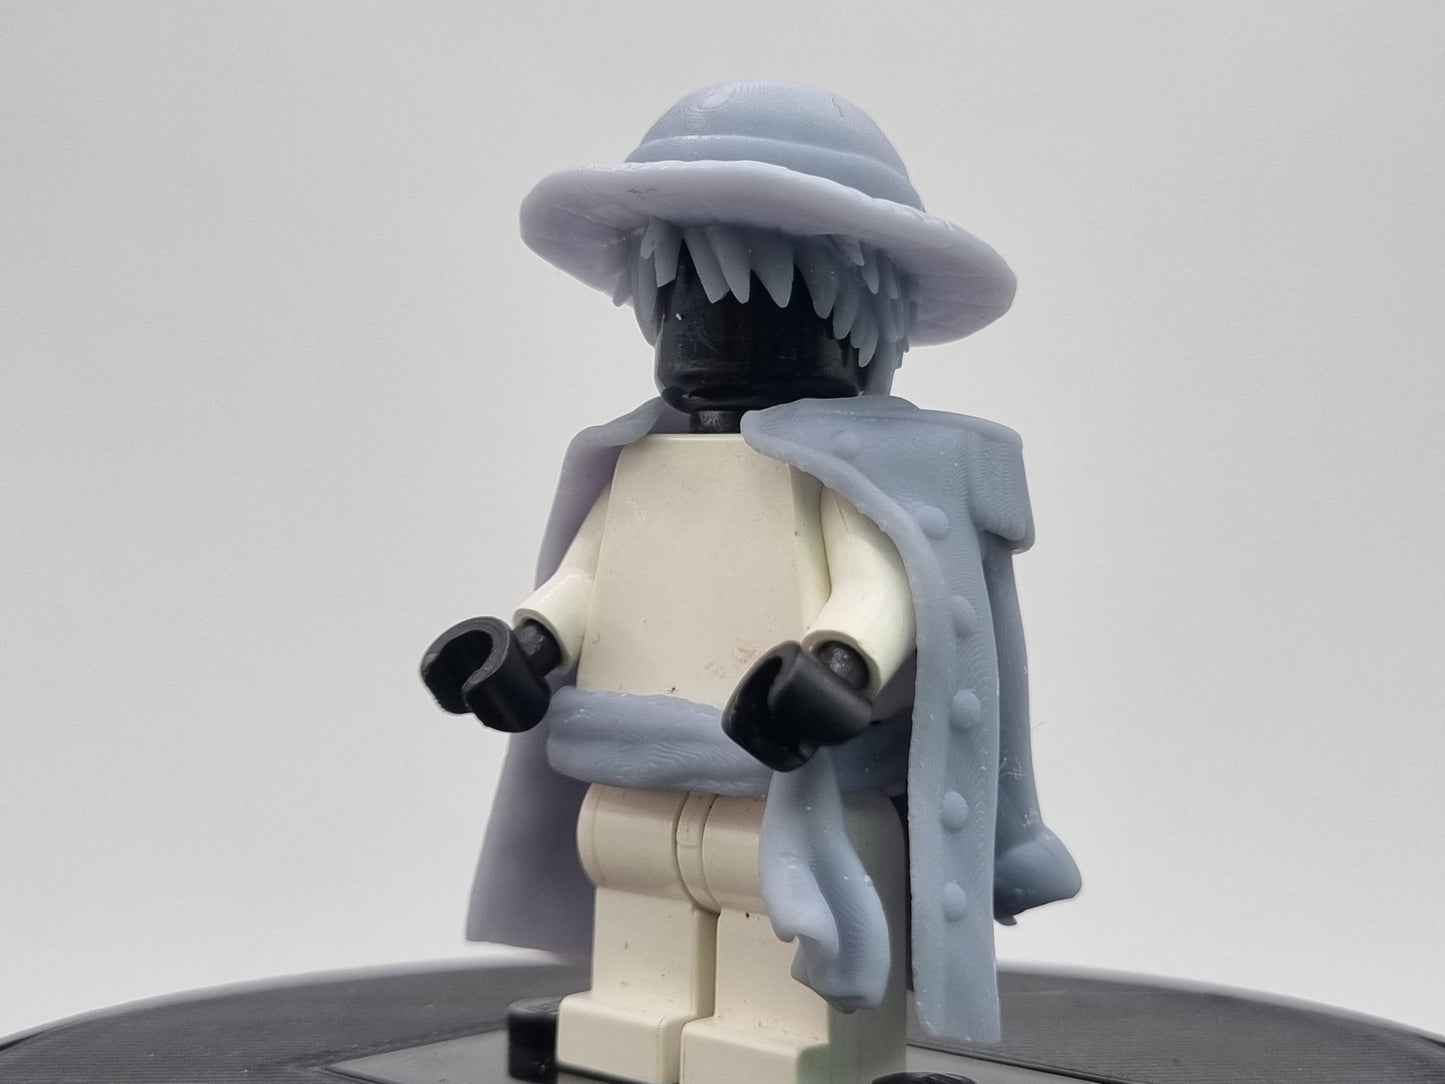 Building toy custom 3D printed rubber pirrate captain with cloak and letters!